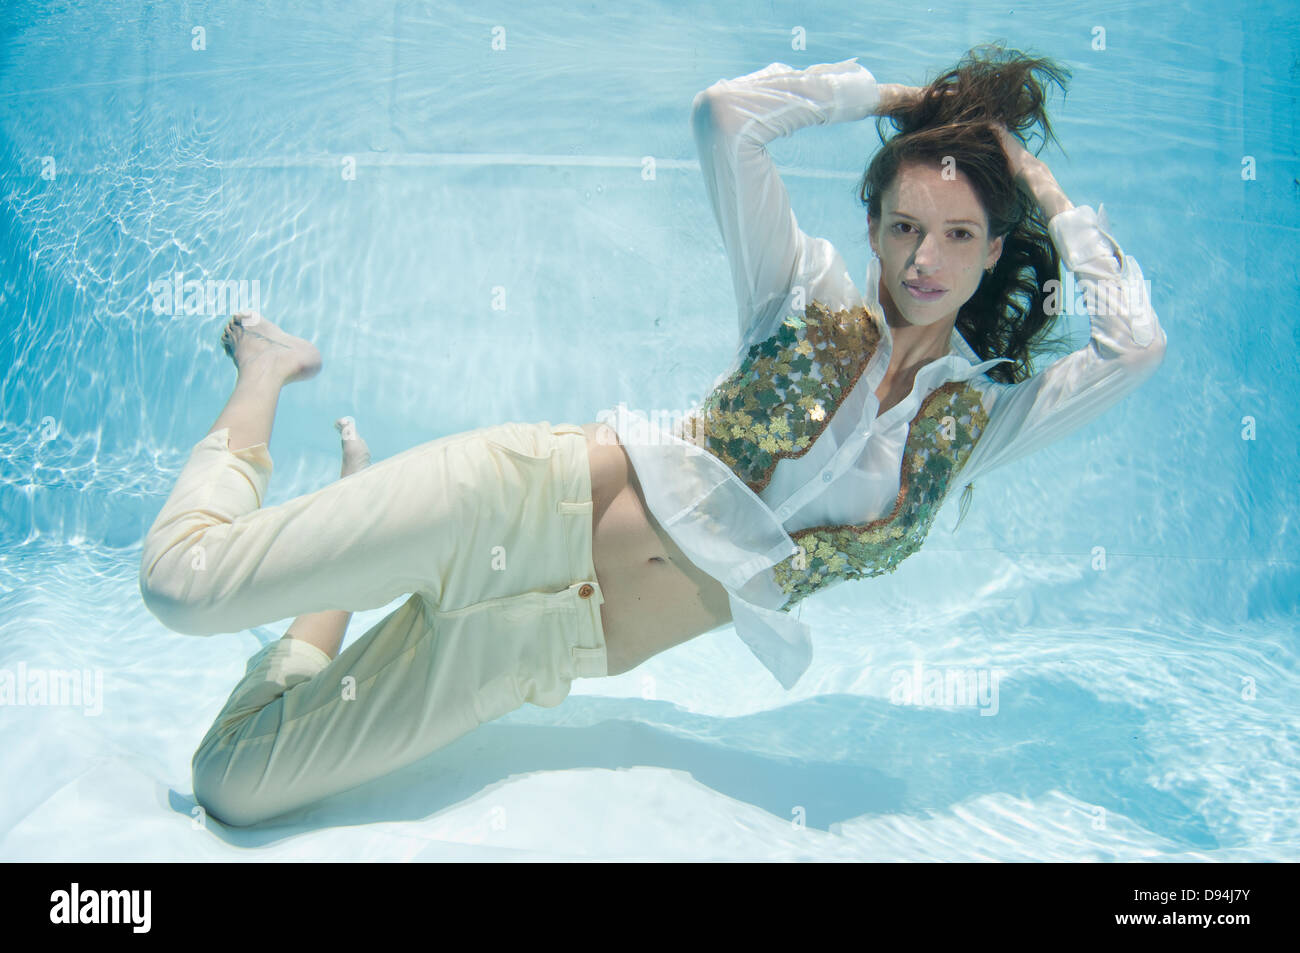 A young trendy dressed woman floats underwater Model release available Stock Photo